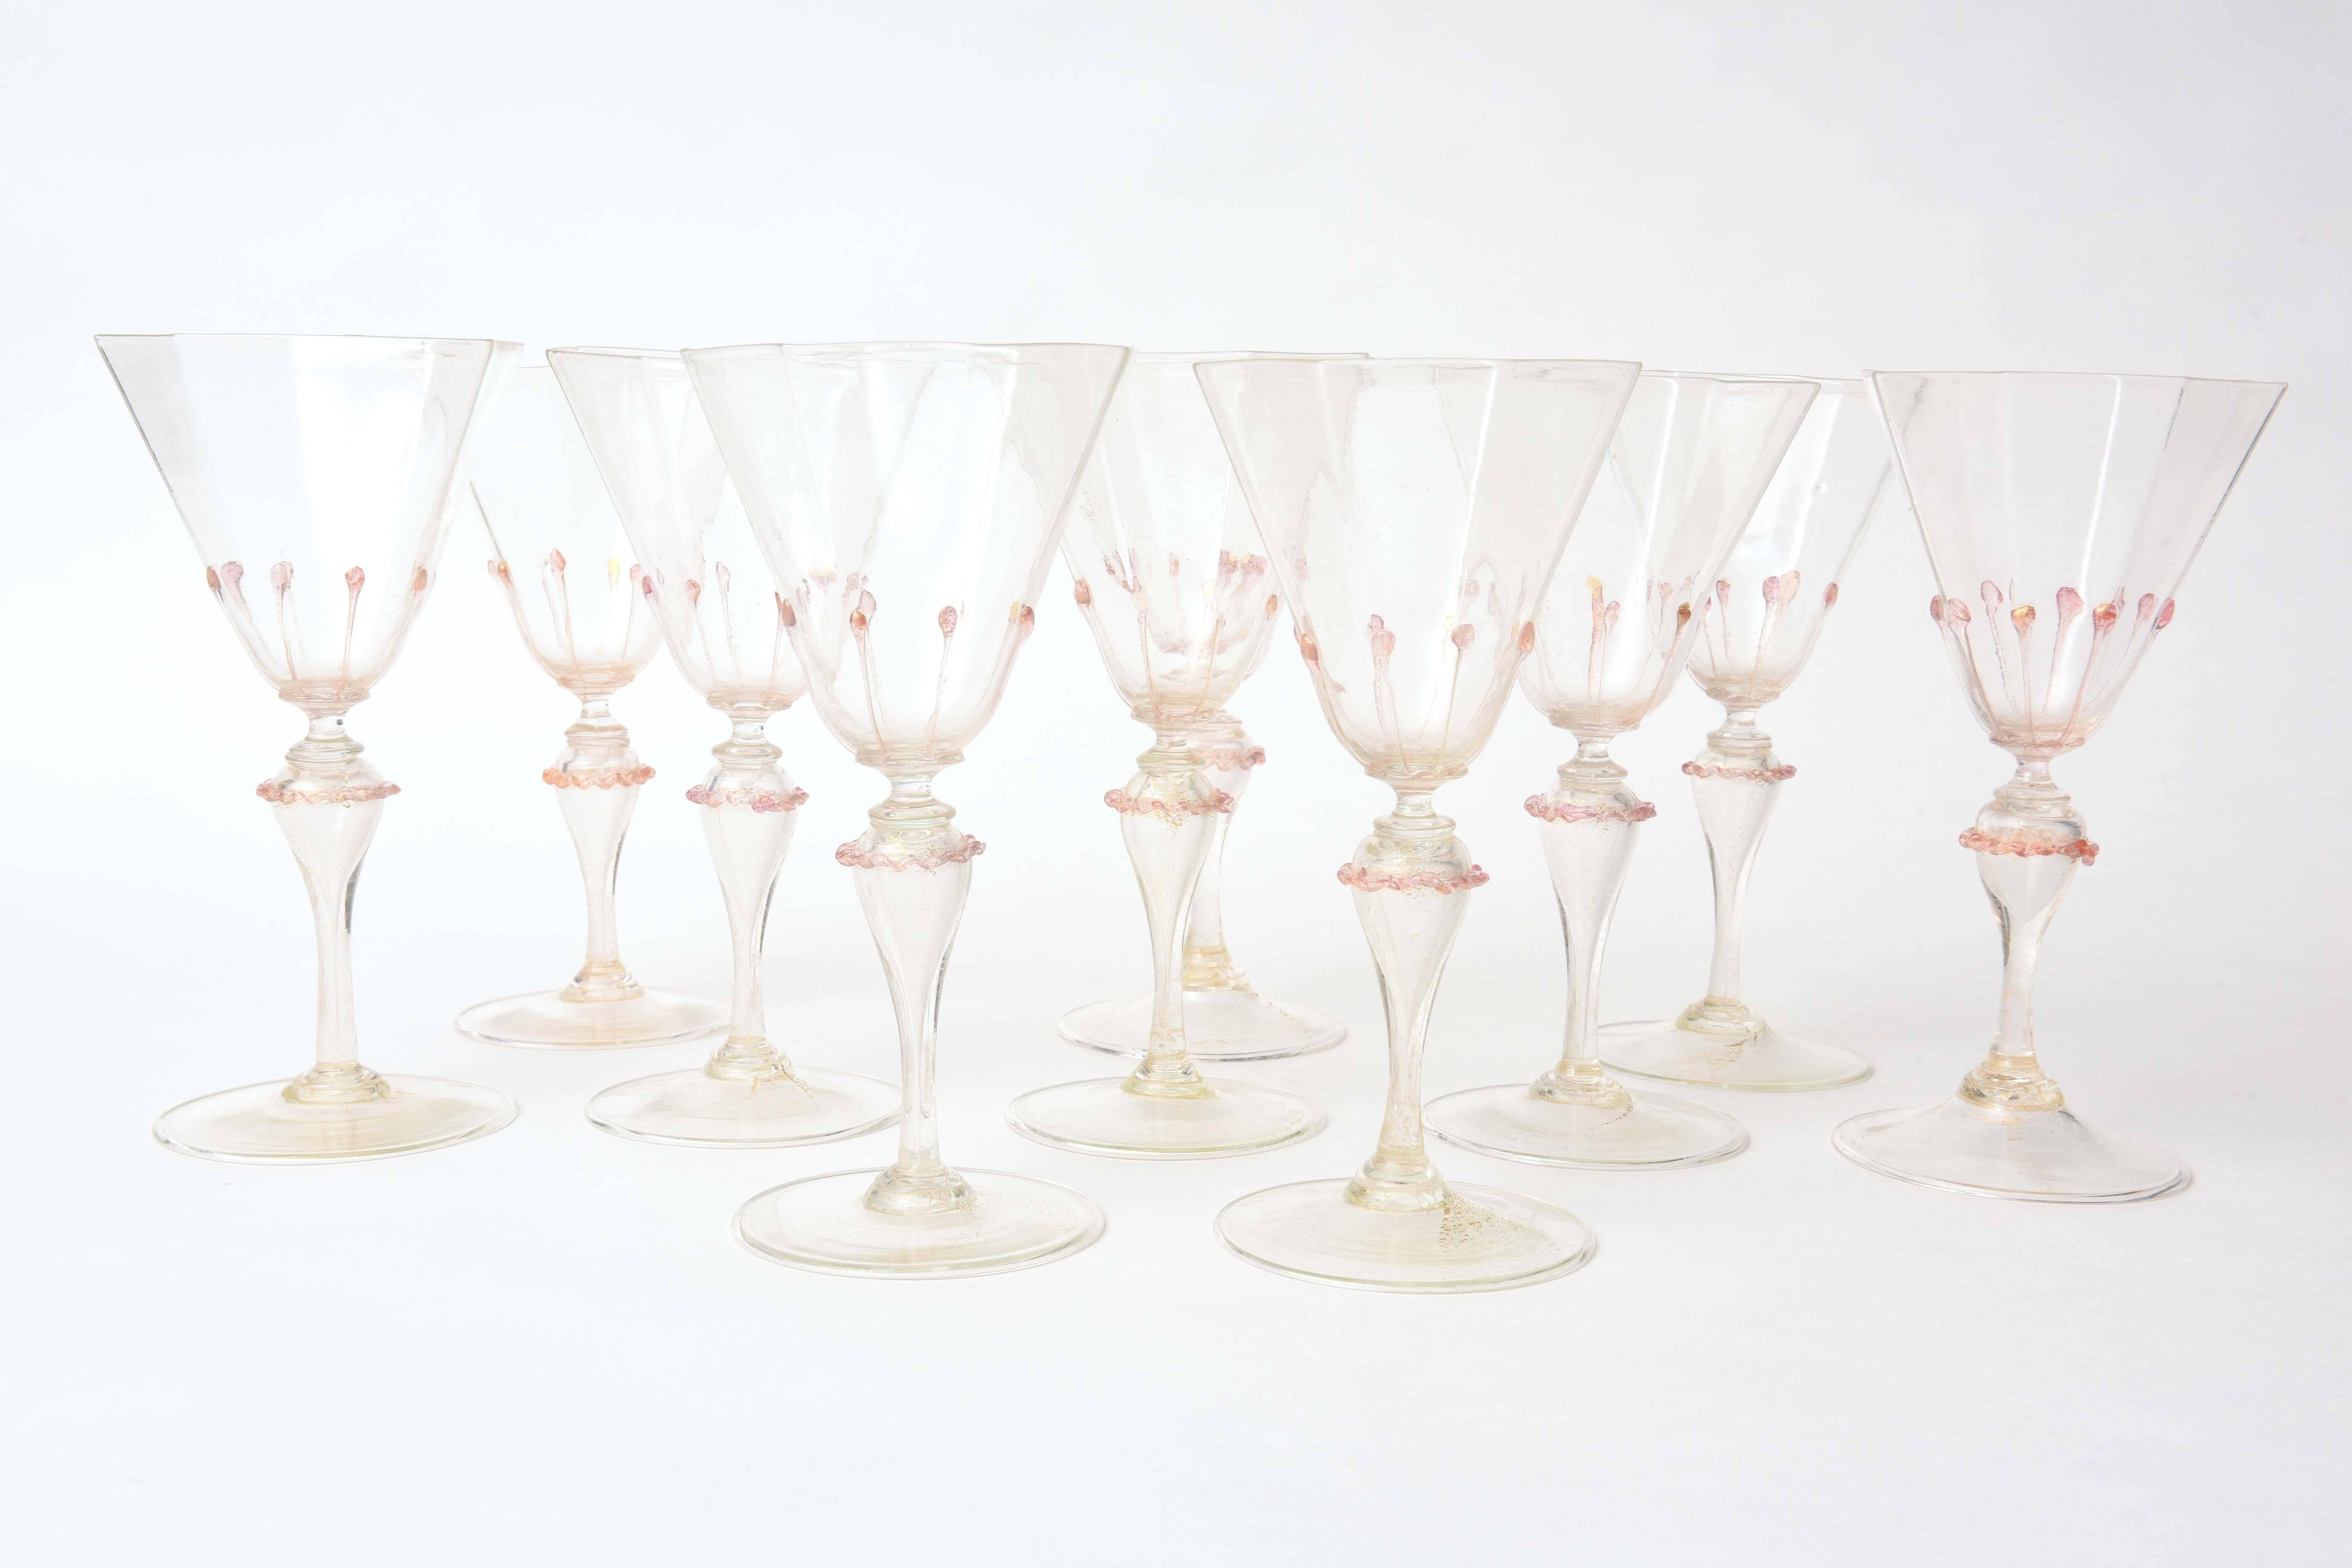 Blown Glass Exquisite Set of Ten Venetian Goblets, Pink & Gilt with Extra Applied Decoration